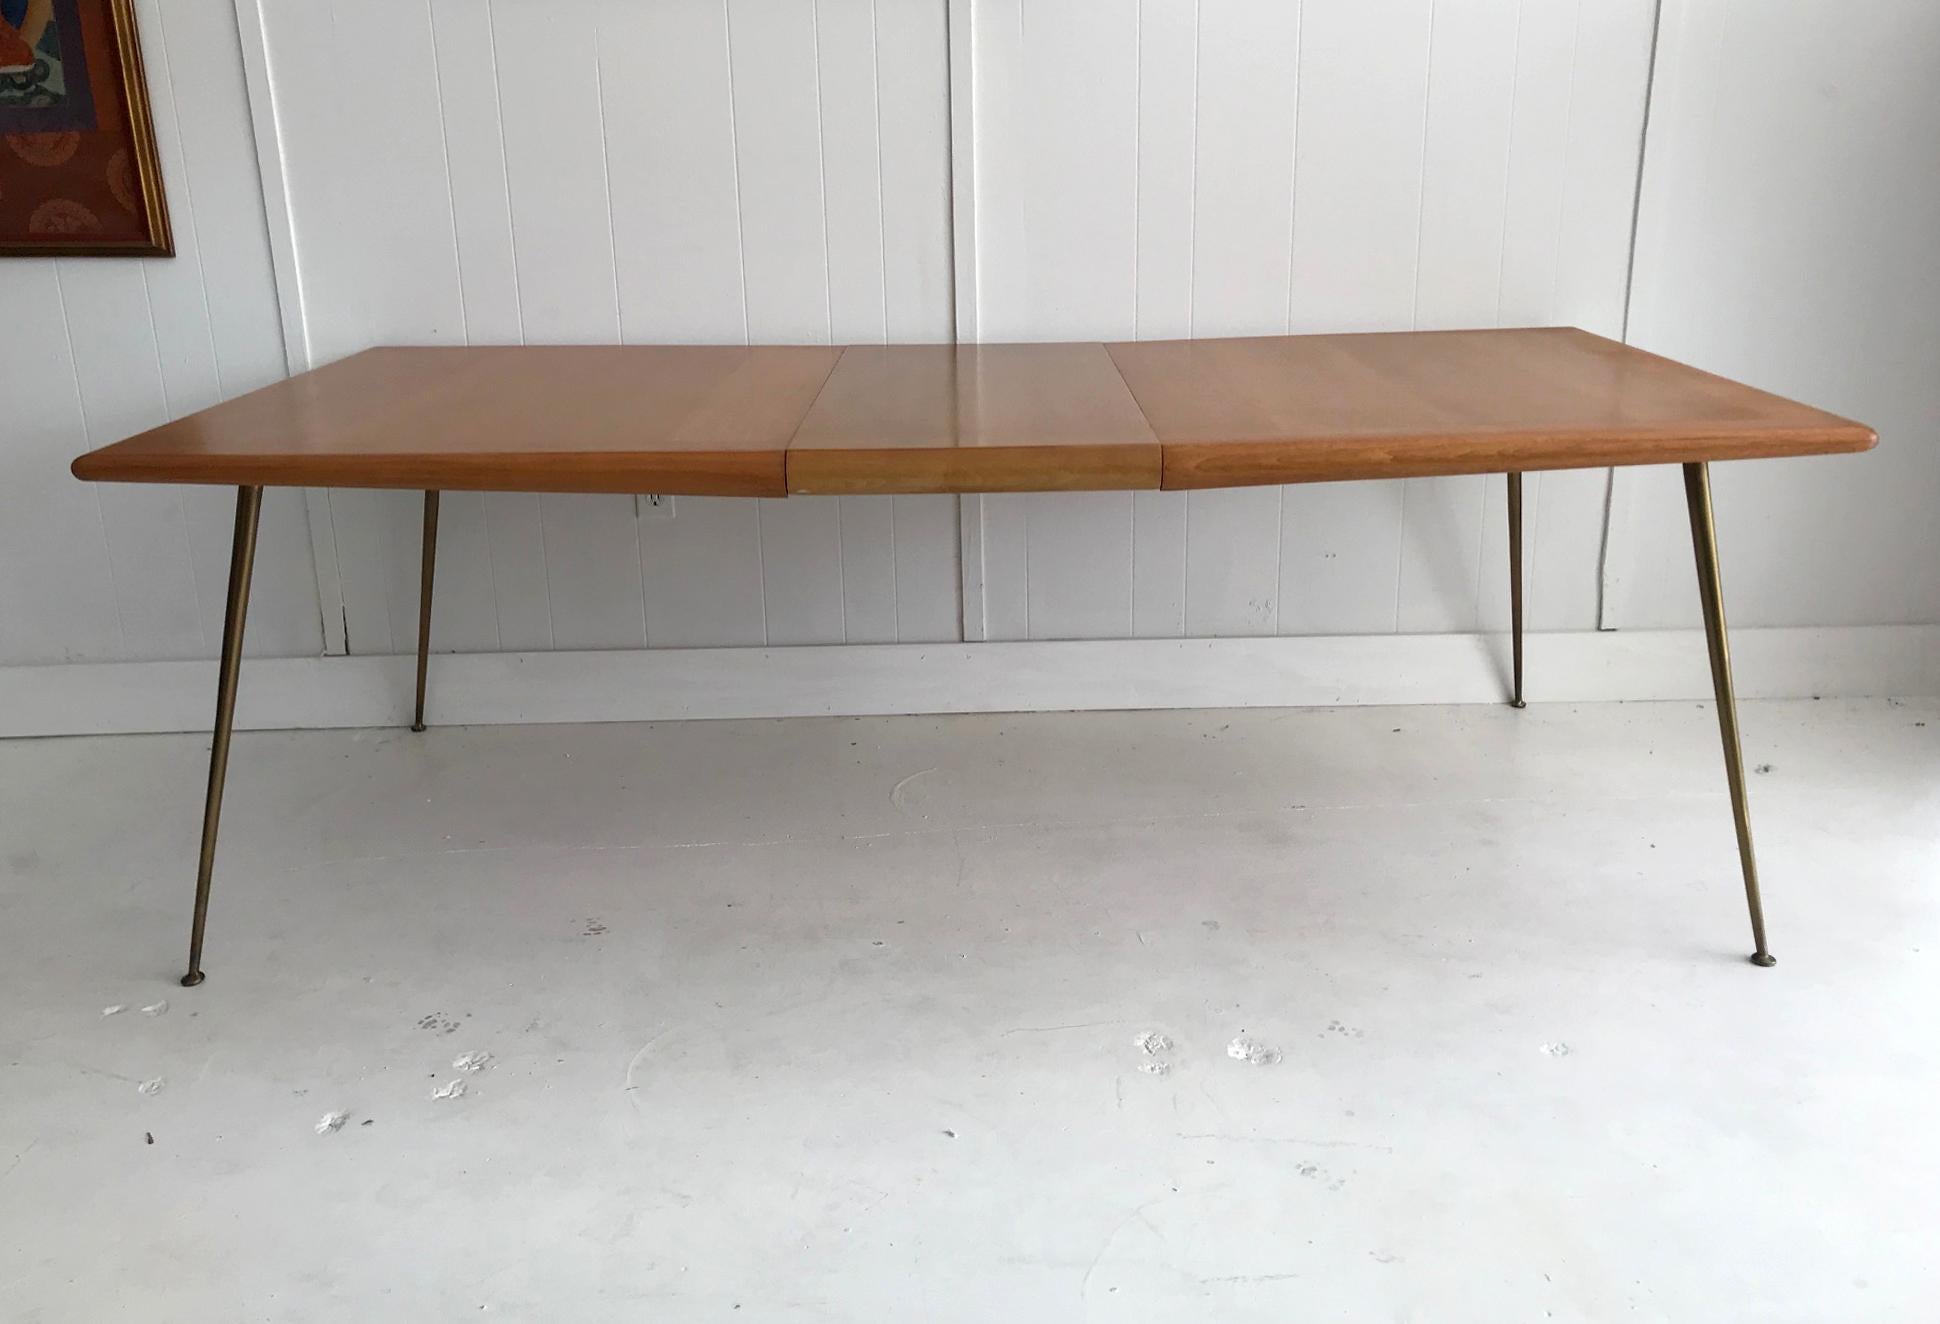 A great looking extension dining table designed by T.H. Robsjohn-Gibbings for Widdicomb. Known as the 